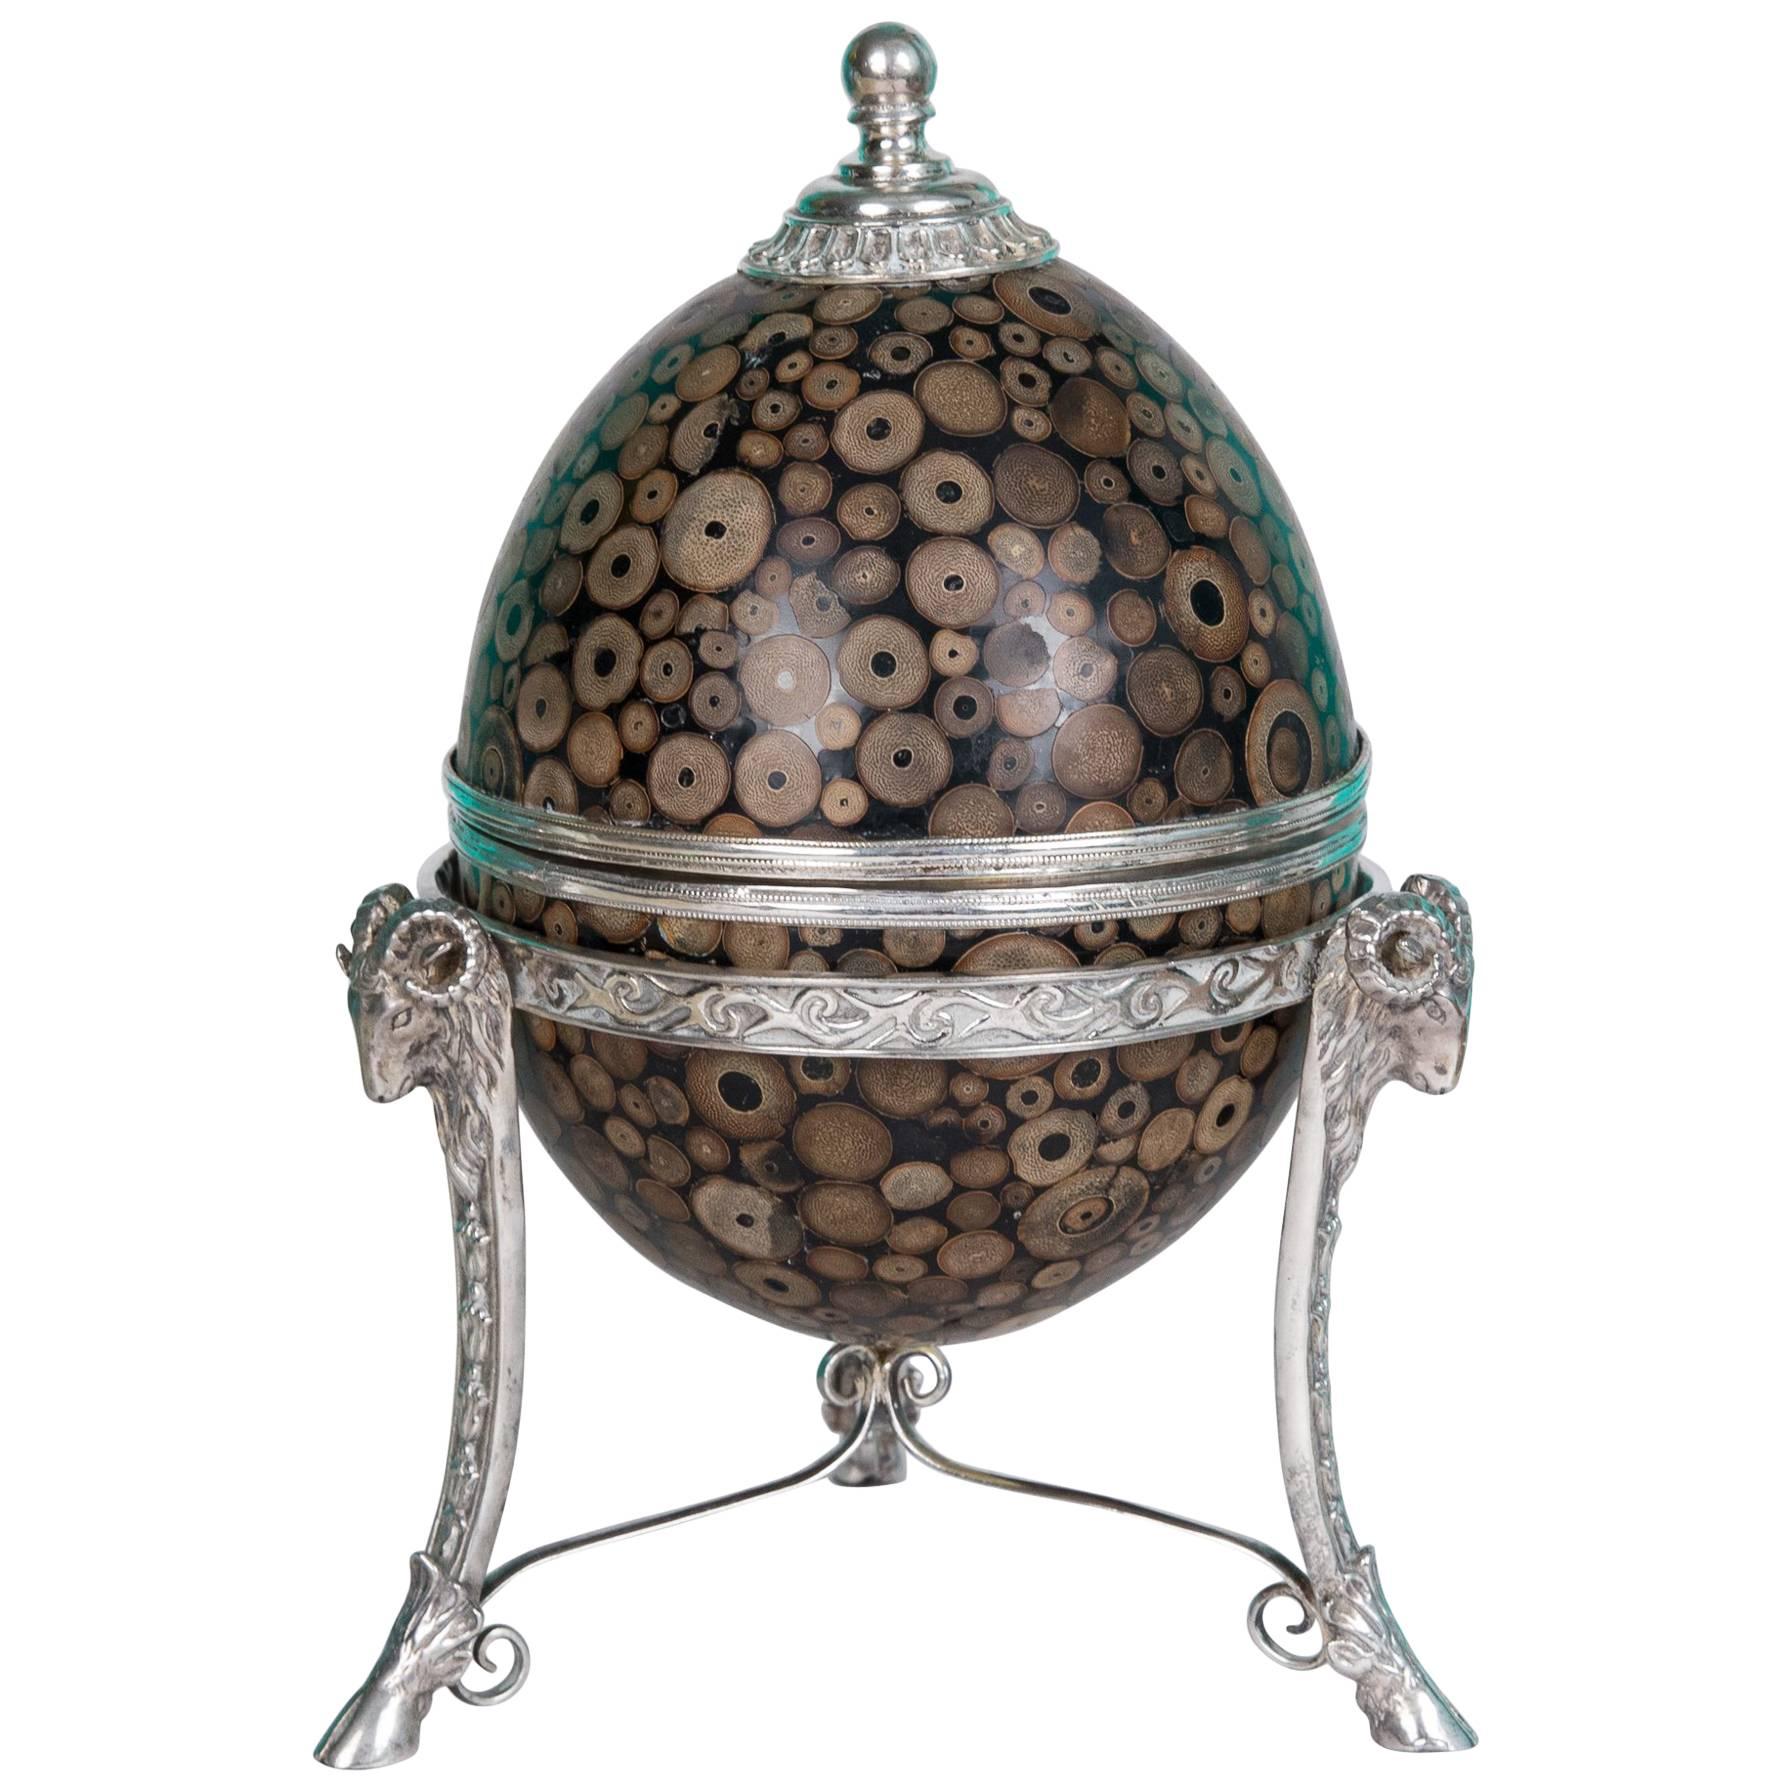 Maitland-Smith Inlaid Egg Form Silver Plate Mounted Box For Sale